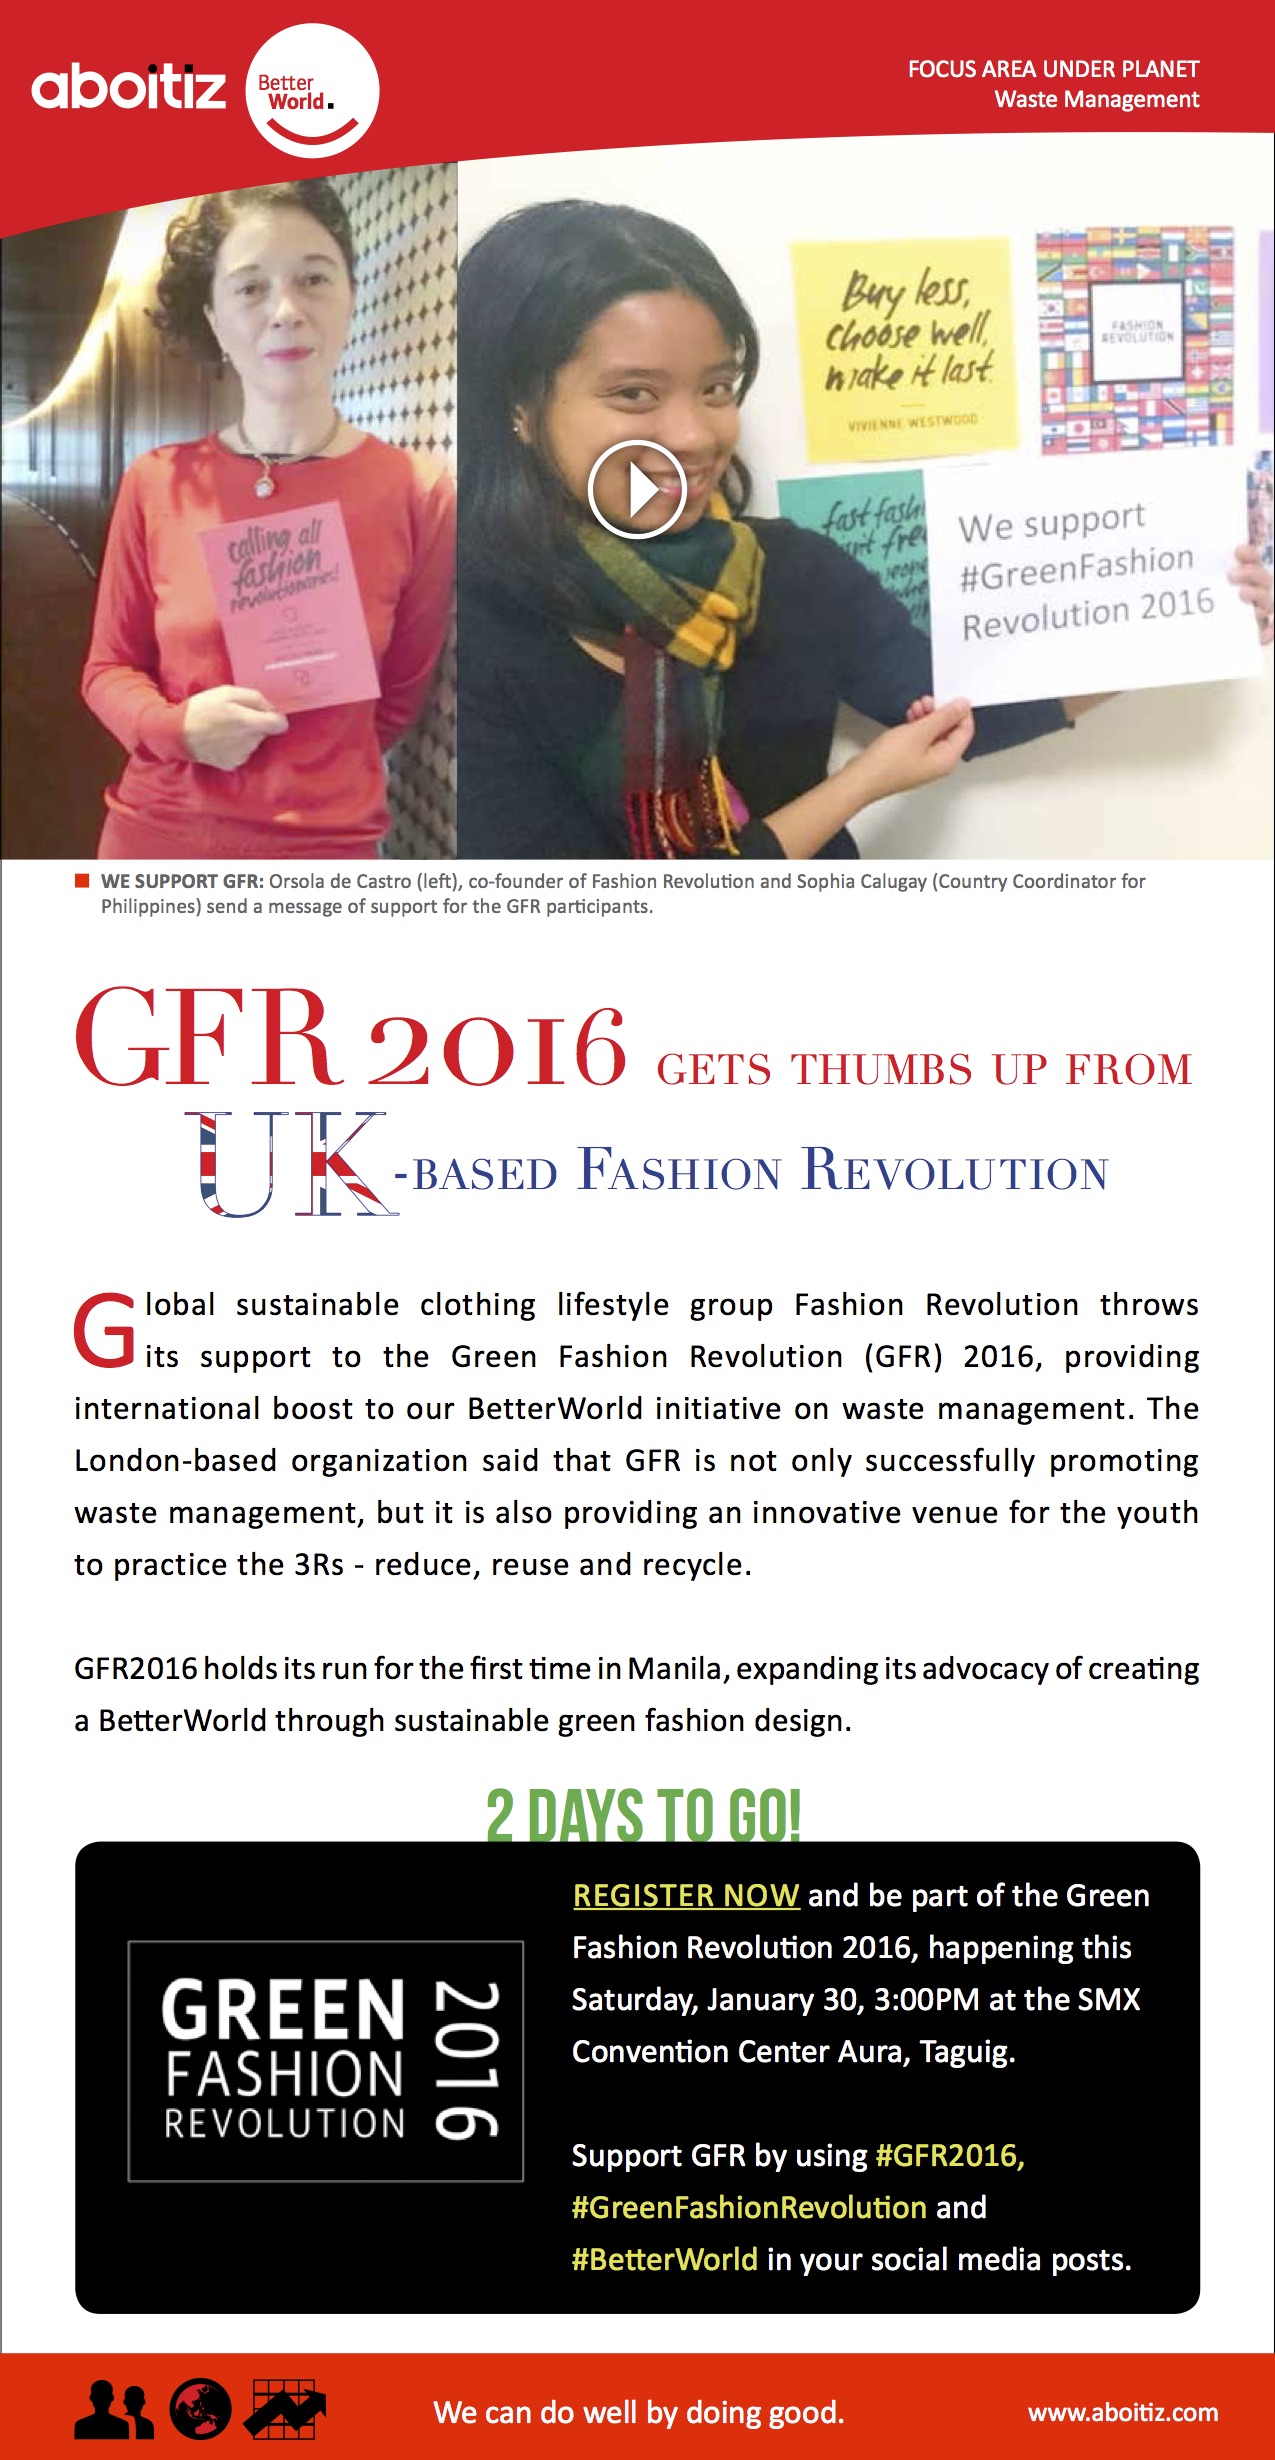 GFR 2016 GETS THUMBS UP FROM UK-BASED FASHION REVOLUTION